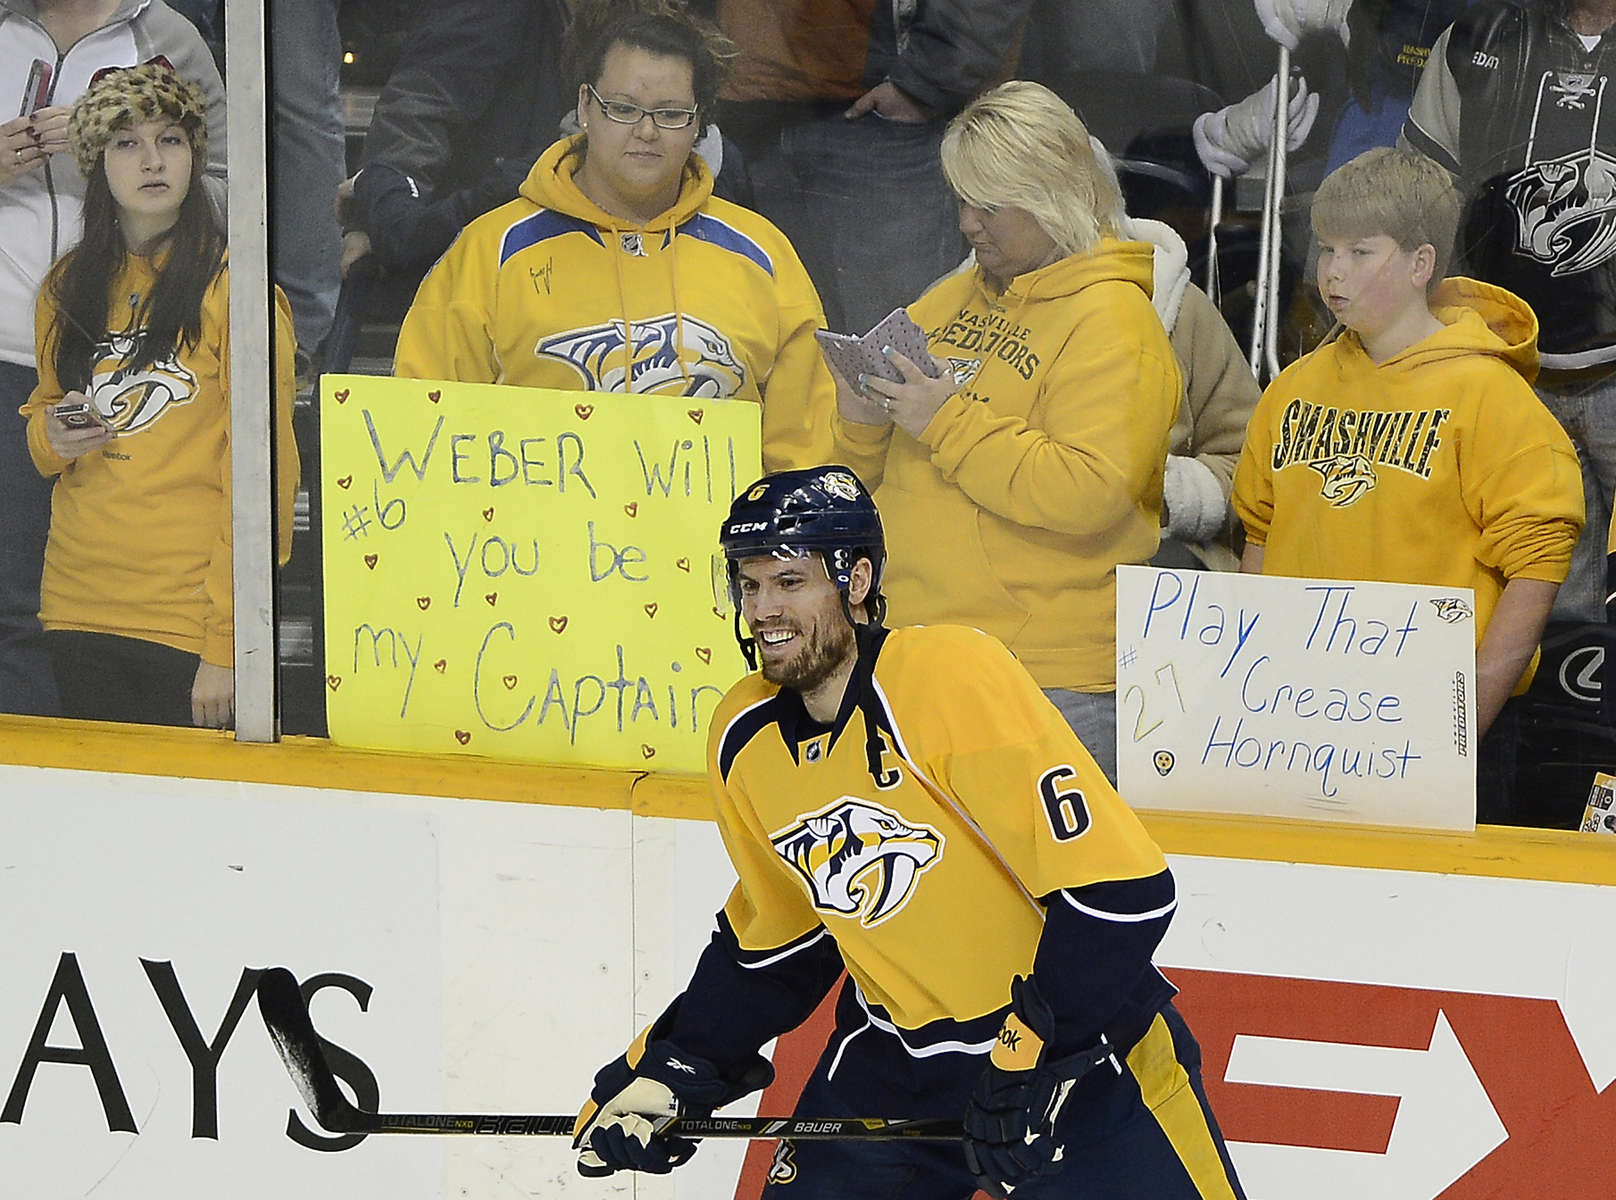 Nashville Predators fans watch defenseman Shea Weber warms up on the ice before playing against the Boston Bruins of an NHL hockey game on Dec. 23, 2013, in Nashville, Tenn. (AP Photo/ Mark Zaleski)